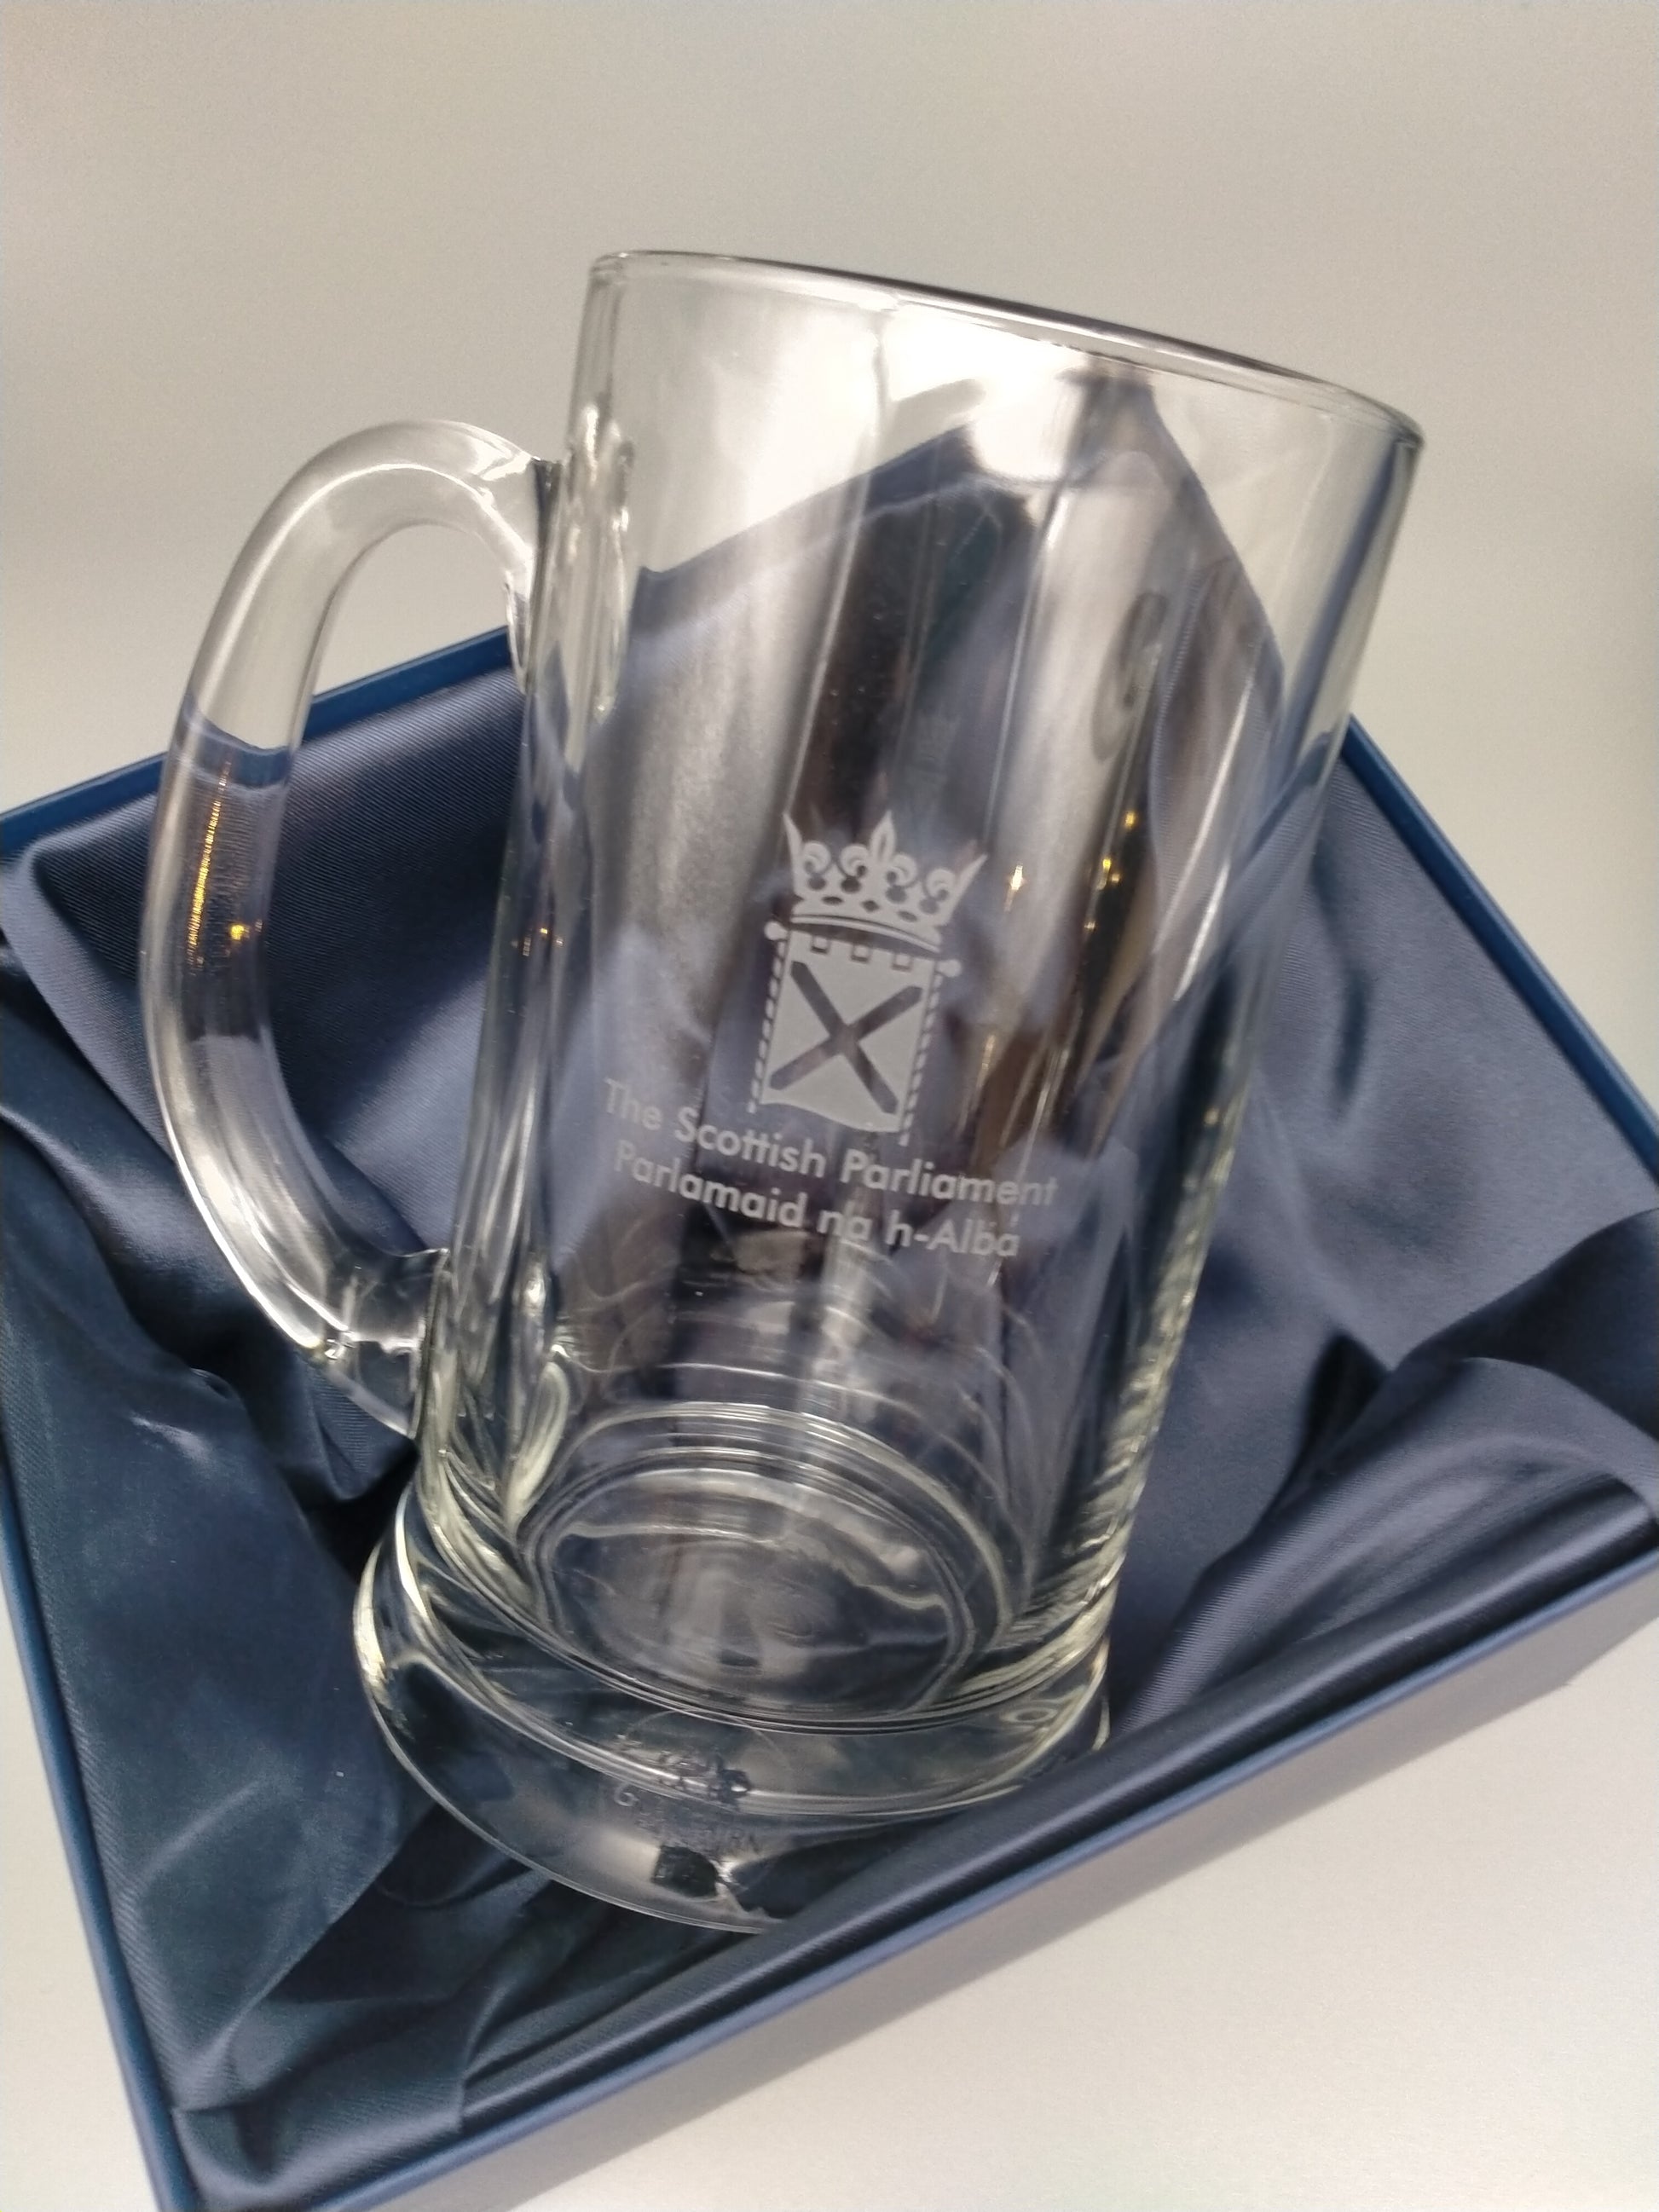 The tankard in its box lined with navy blue fabric.